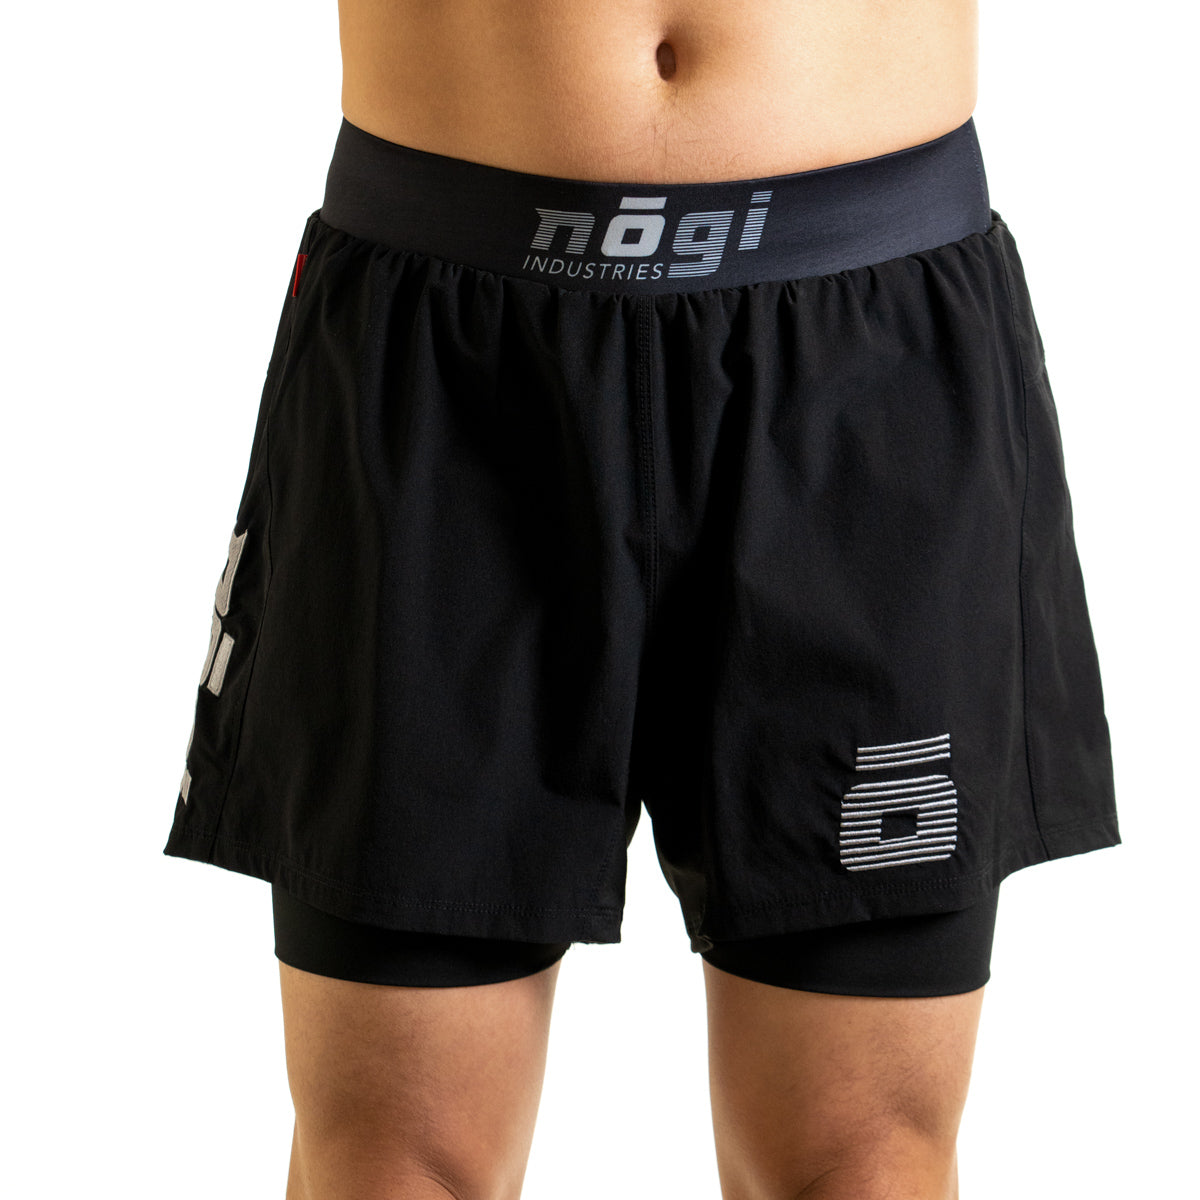 Ghost 5" Premium Lined Grappling Shorts - Obsidian Black Front View